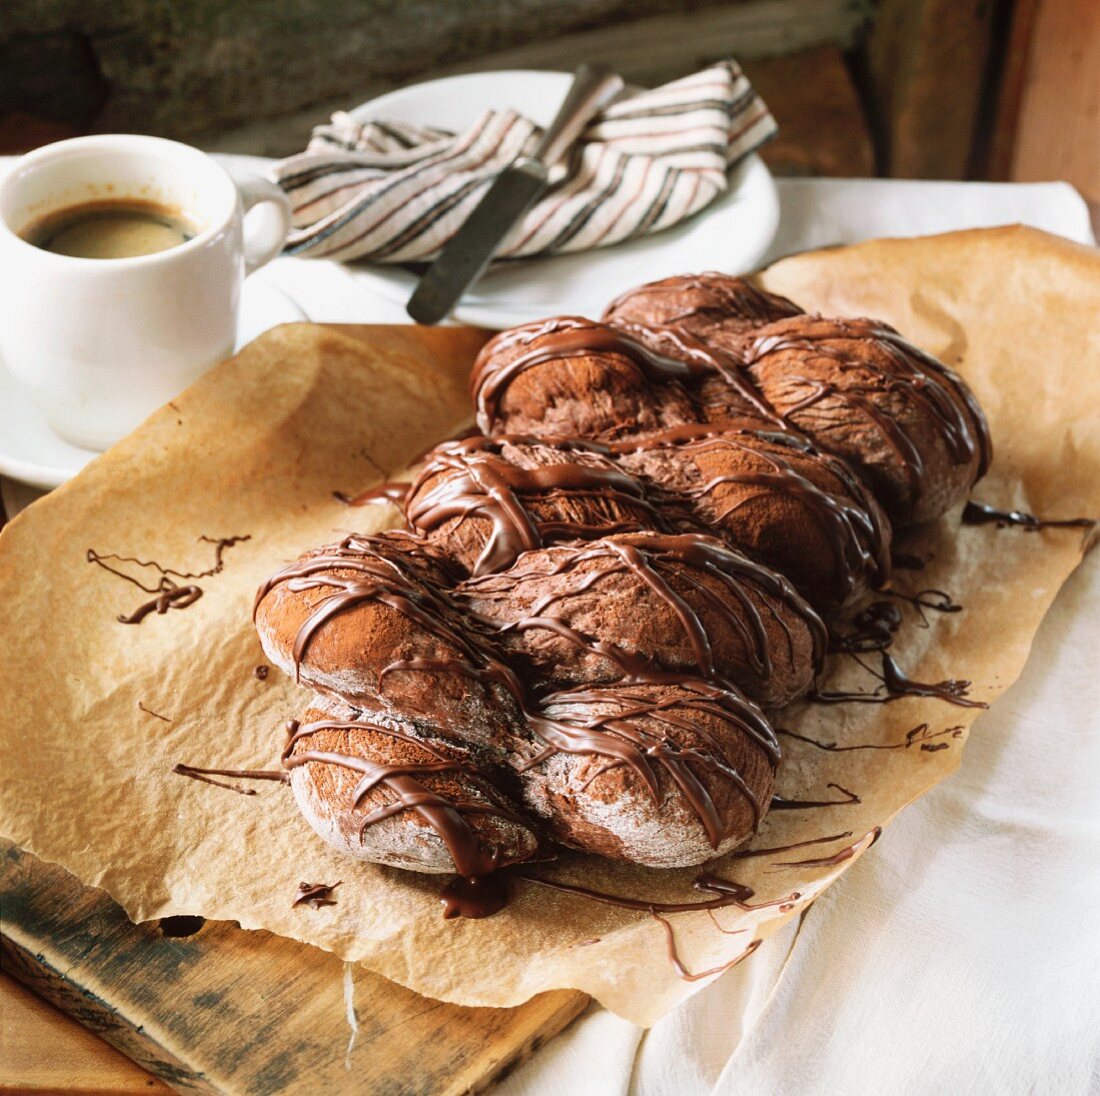 Chocolate yeast plait and cup of coffee